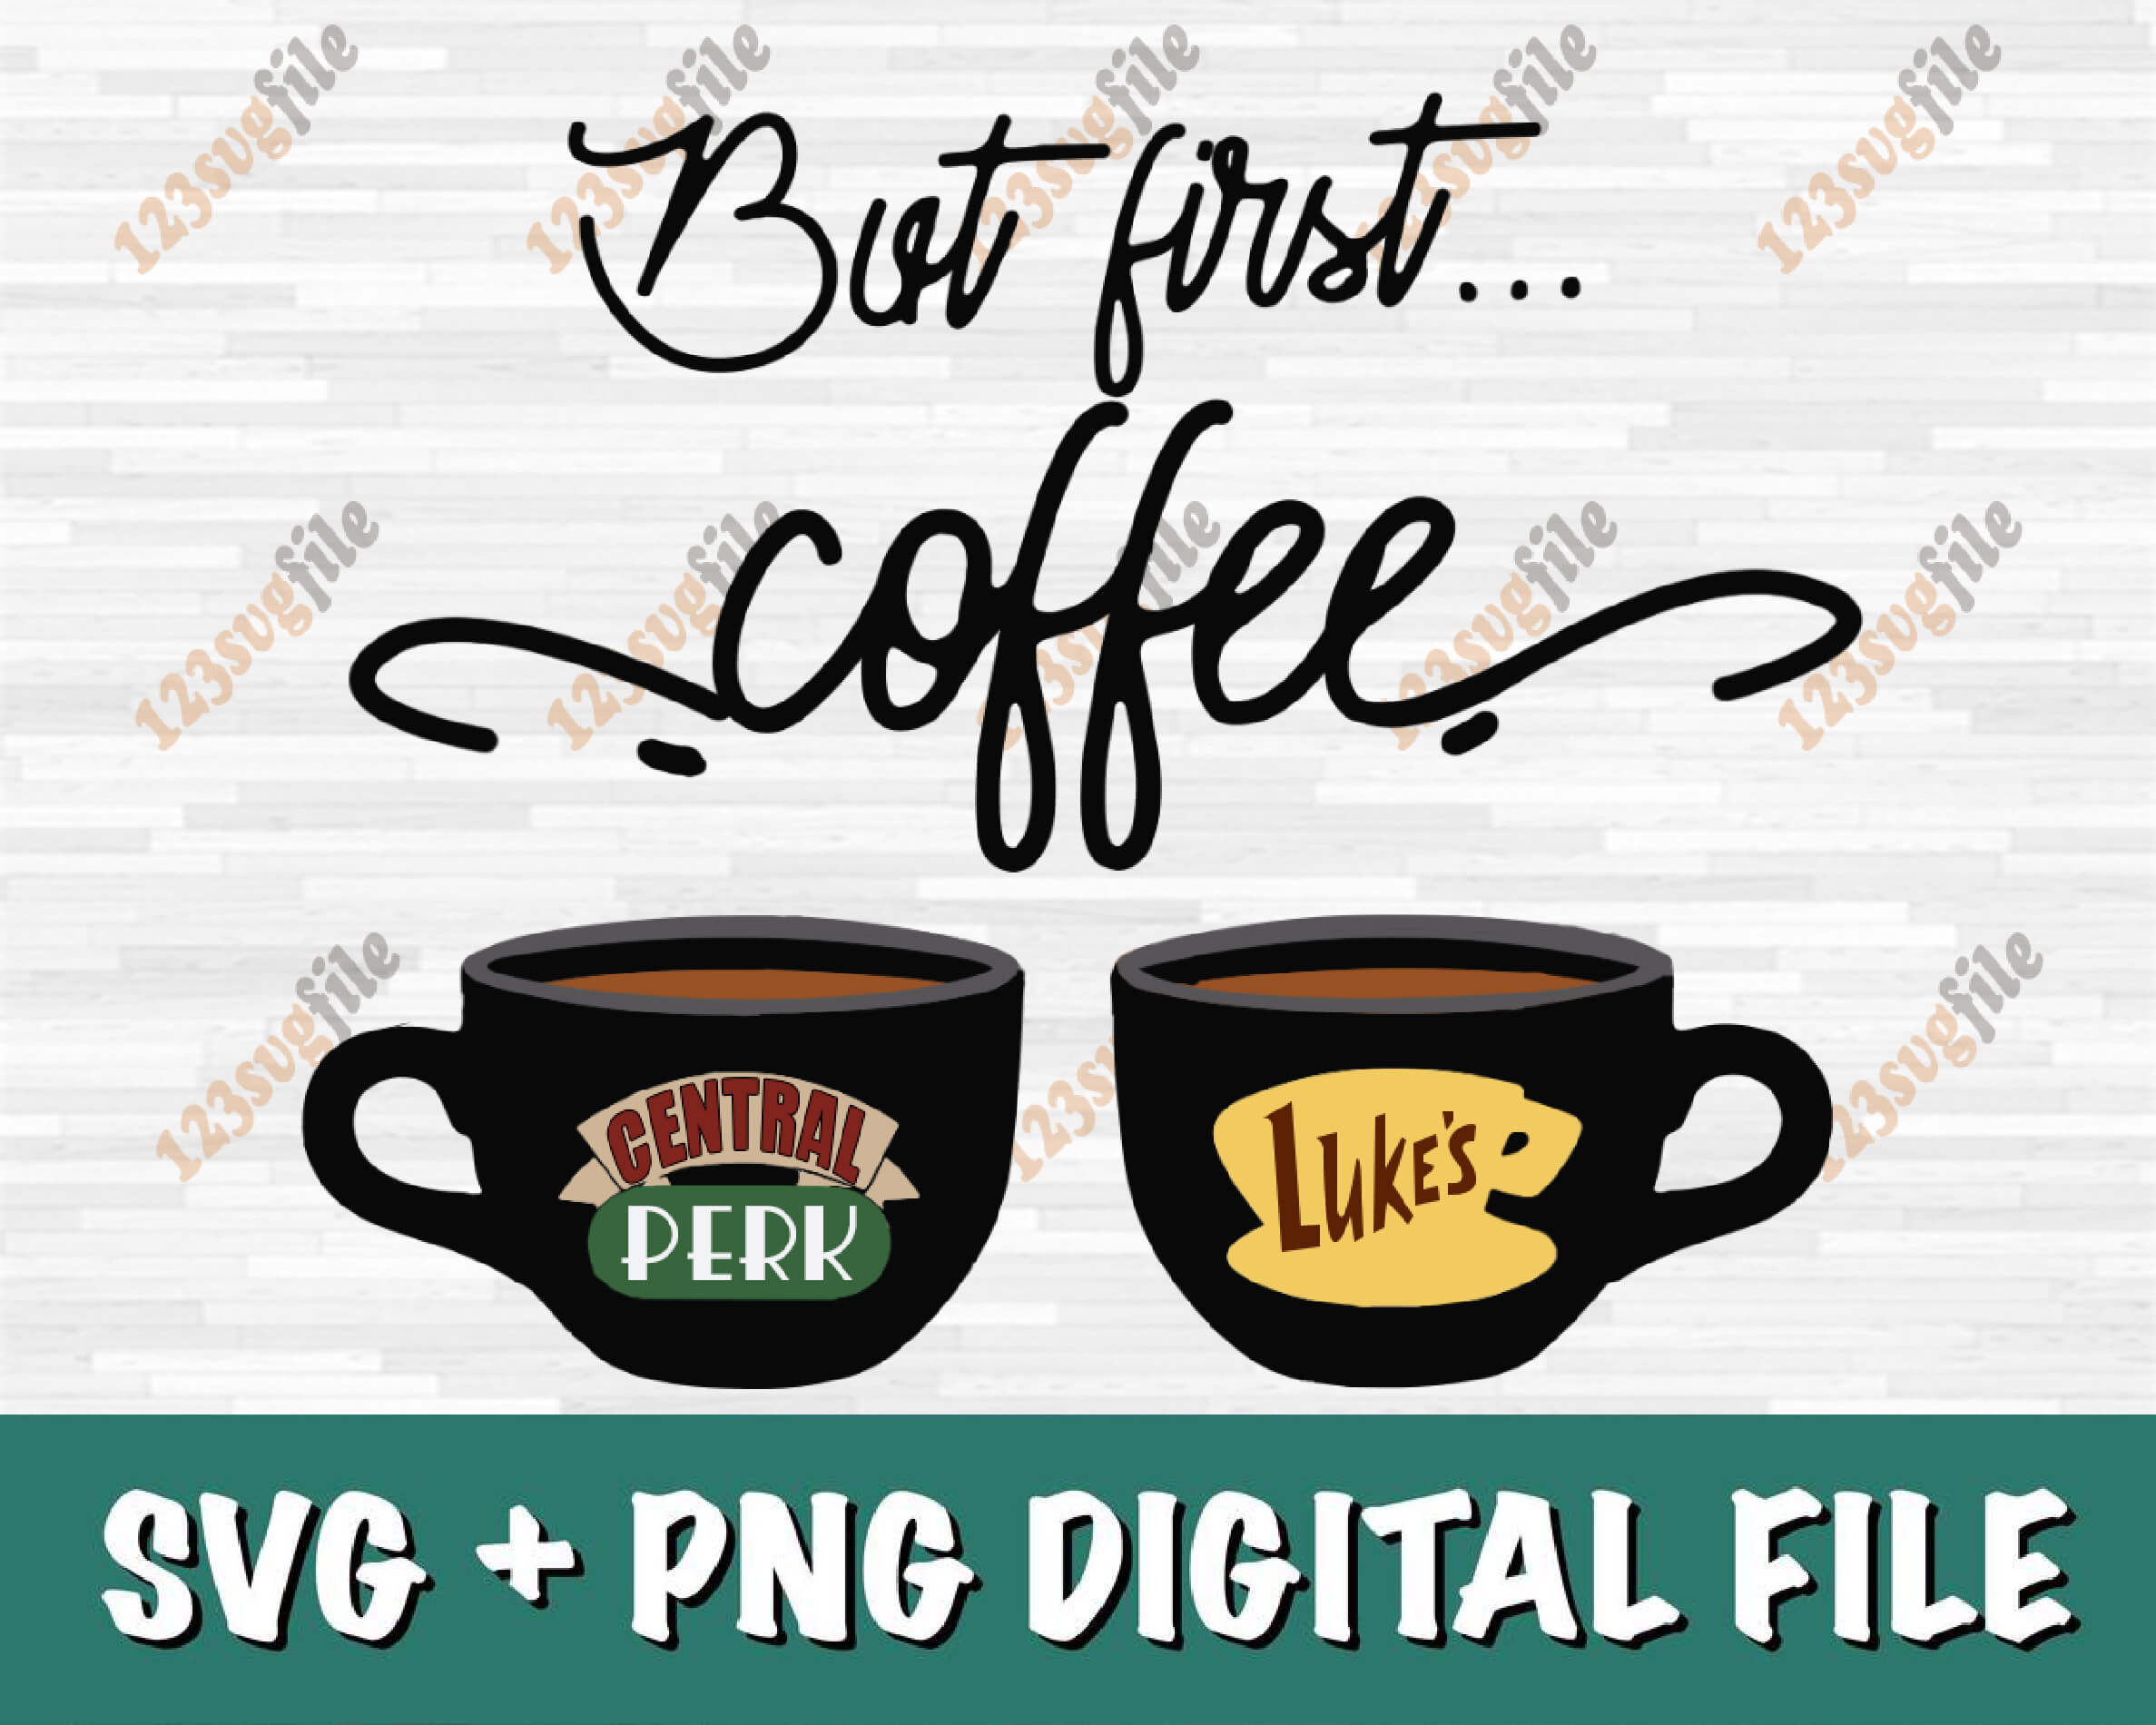 Download But First Coffee Central Perk And Luke S Svg Png Eps Dxf 123svgfile